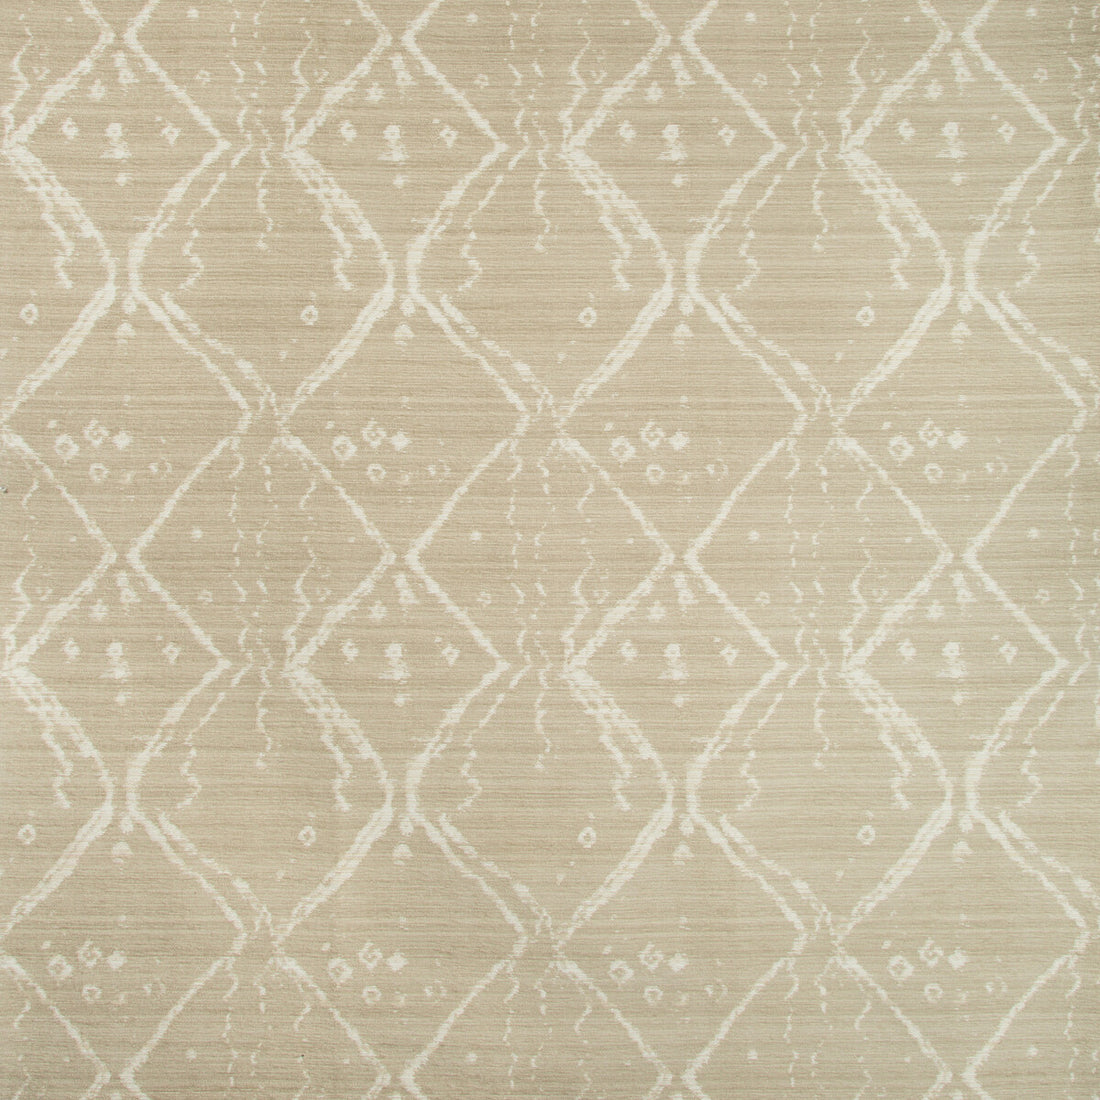 Globe Trot fabric in papyrus color - pattern 34948.116.0 - by Kravet Design in the Nate Berkus Well-Traveled collection